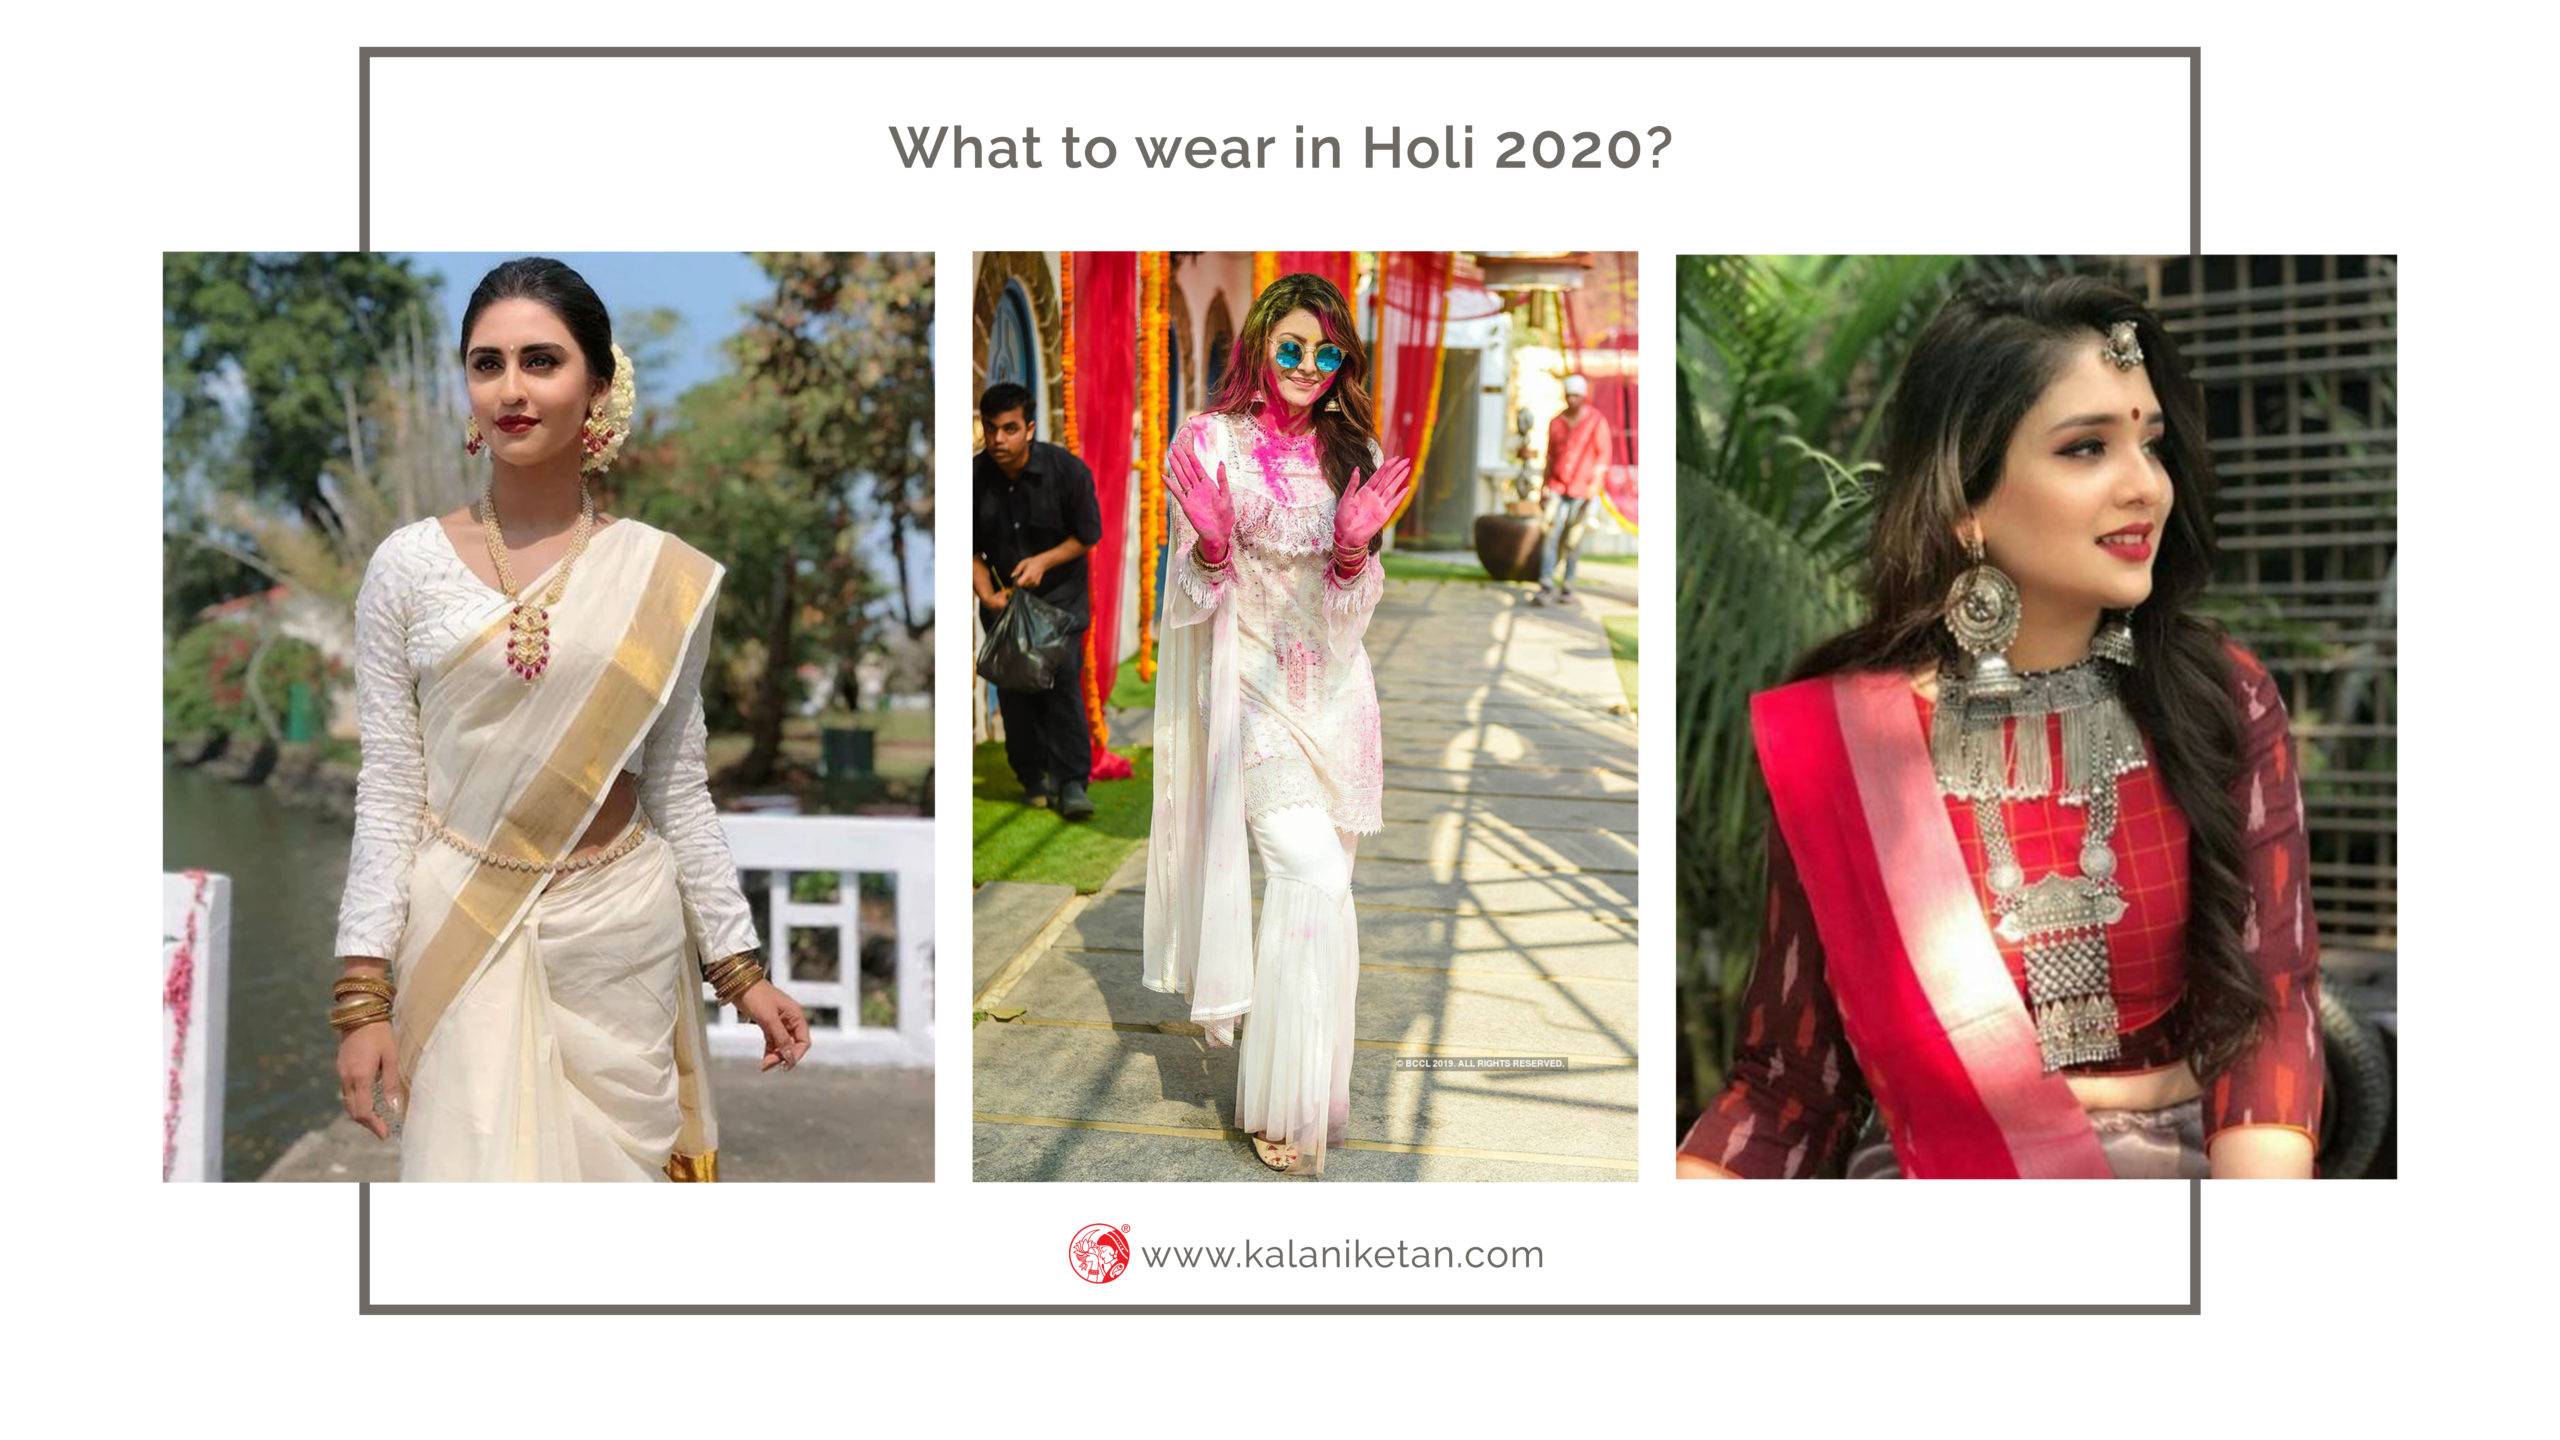 What to wear during Holi 2020?